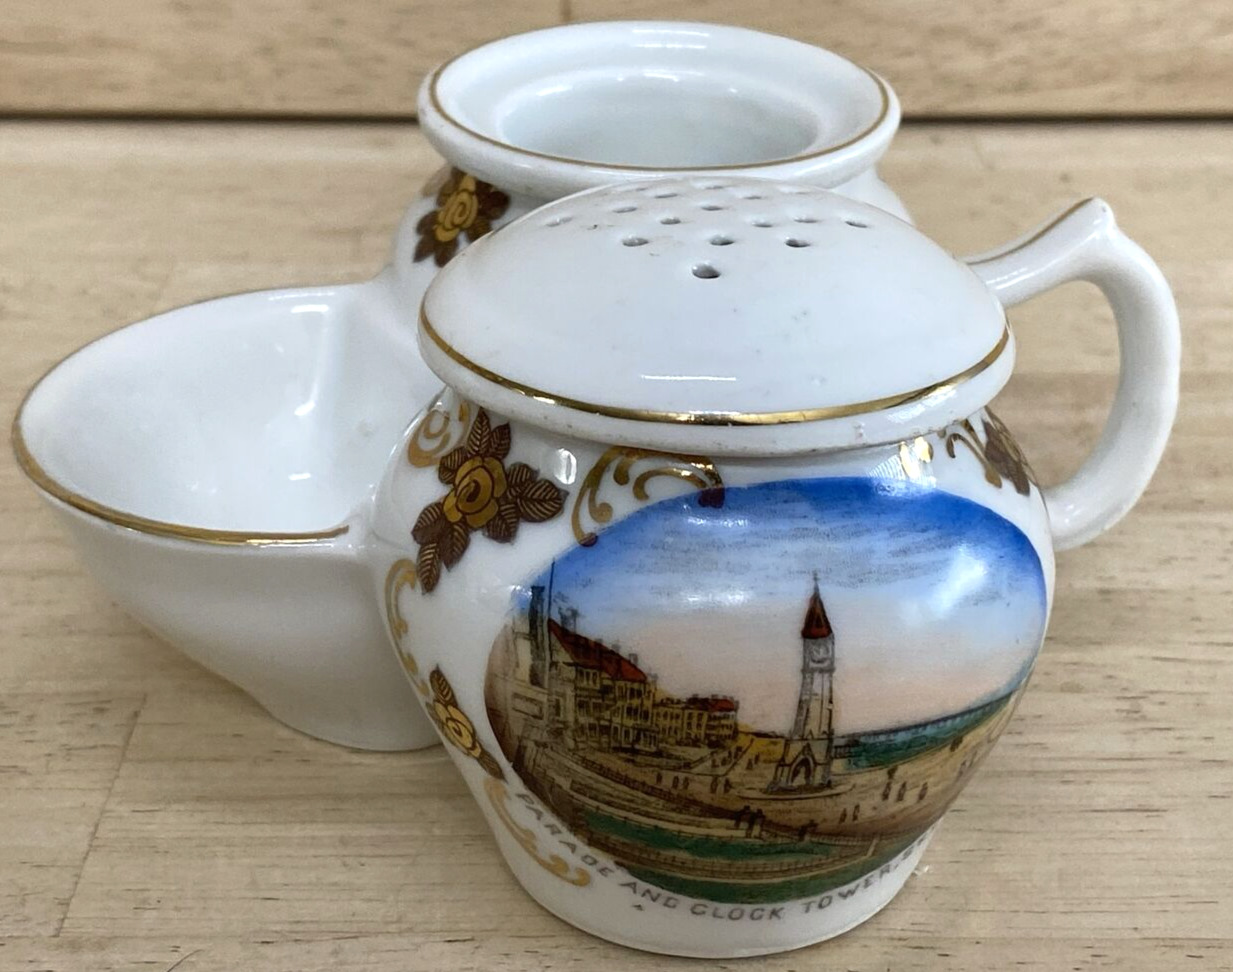 Parade Clock Tower Skegness England Handle Tea Set Strainer 3 Sections Painted